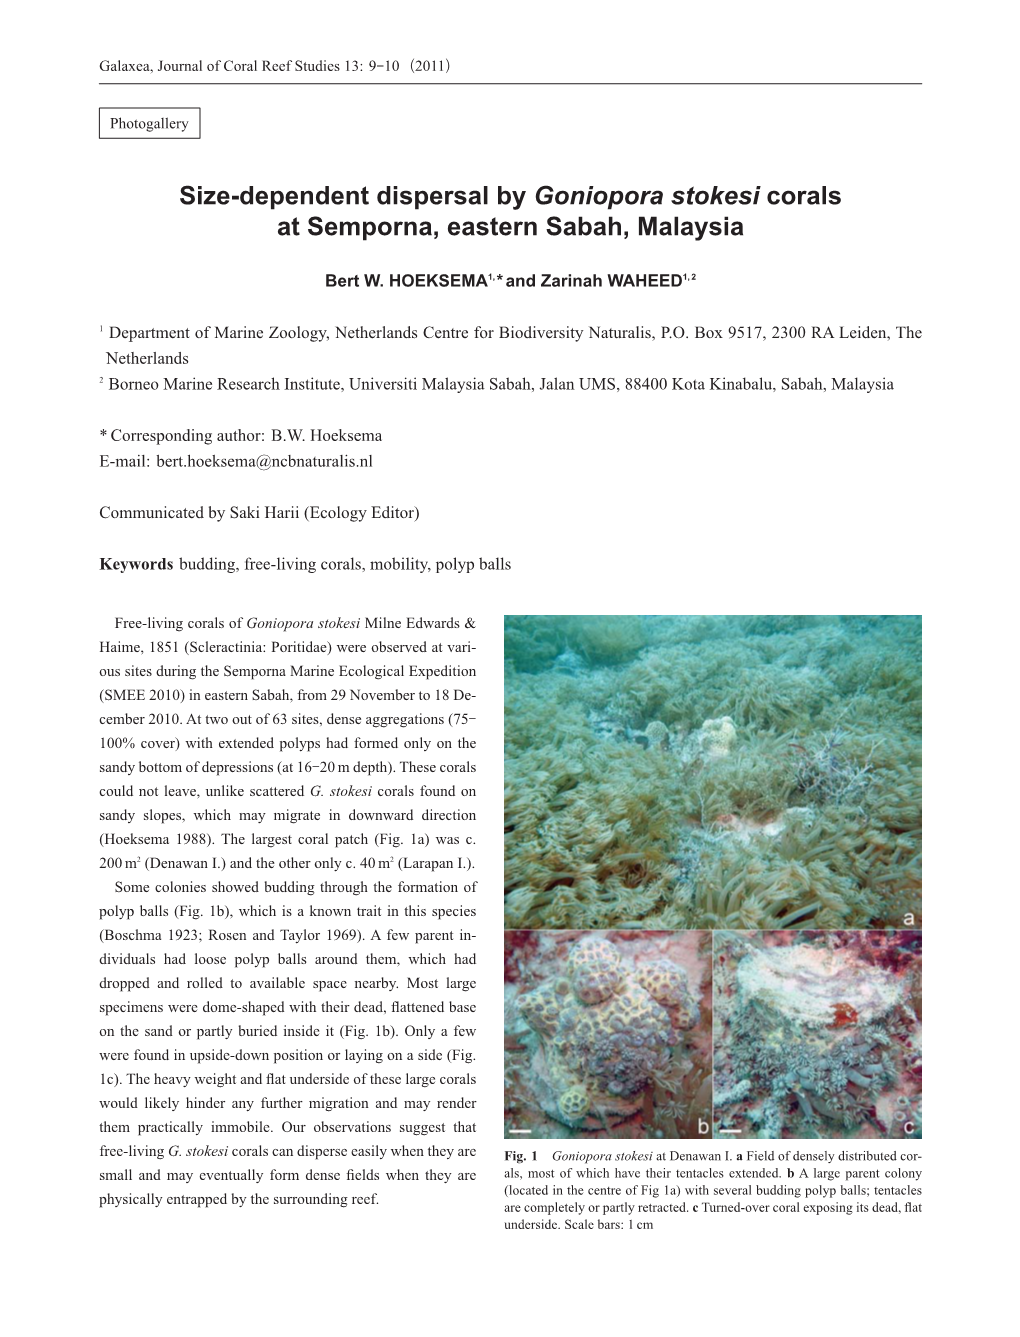 Size-Dependent Dispersal by Goniopora Stokesi Corals at Semporna, Eastern Sabah, Malaysia